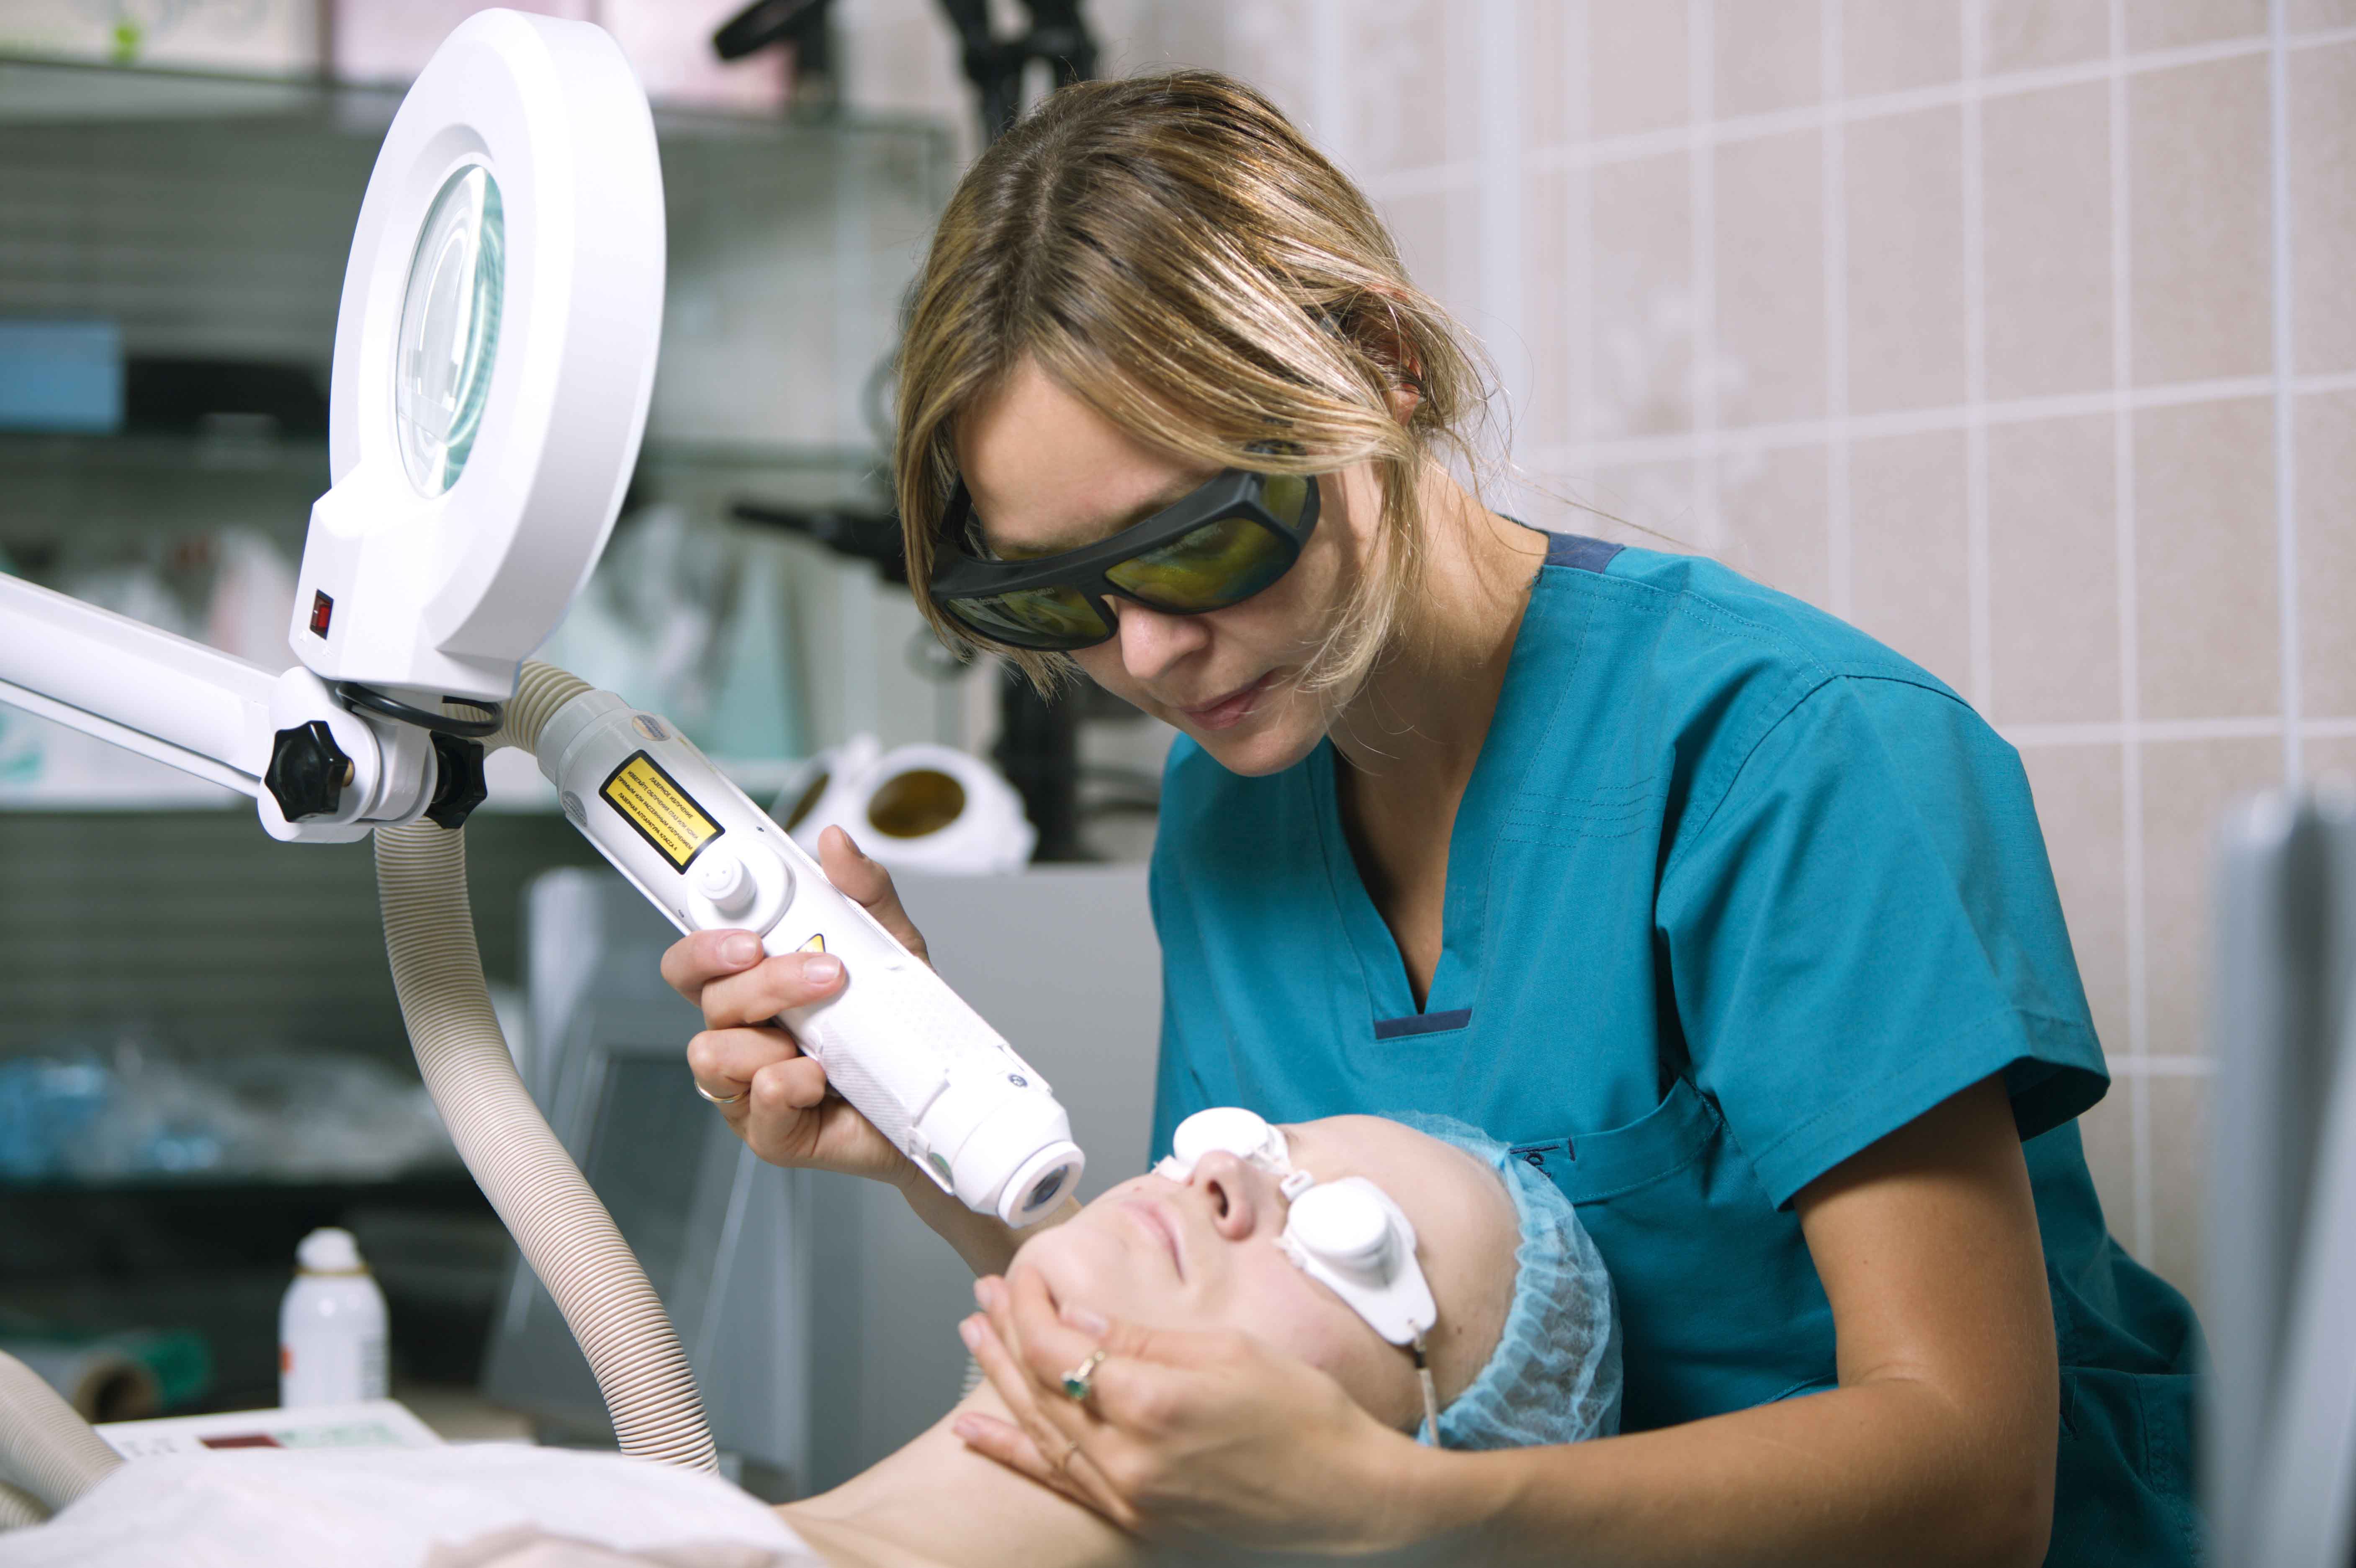 Laser training in medical environments